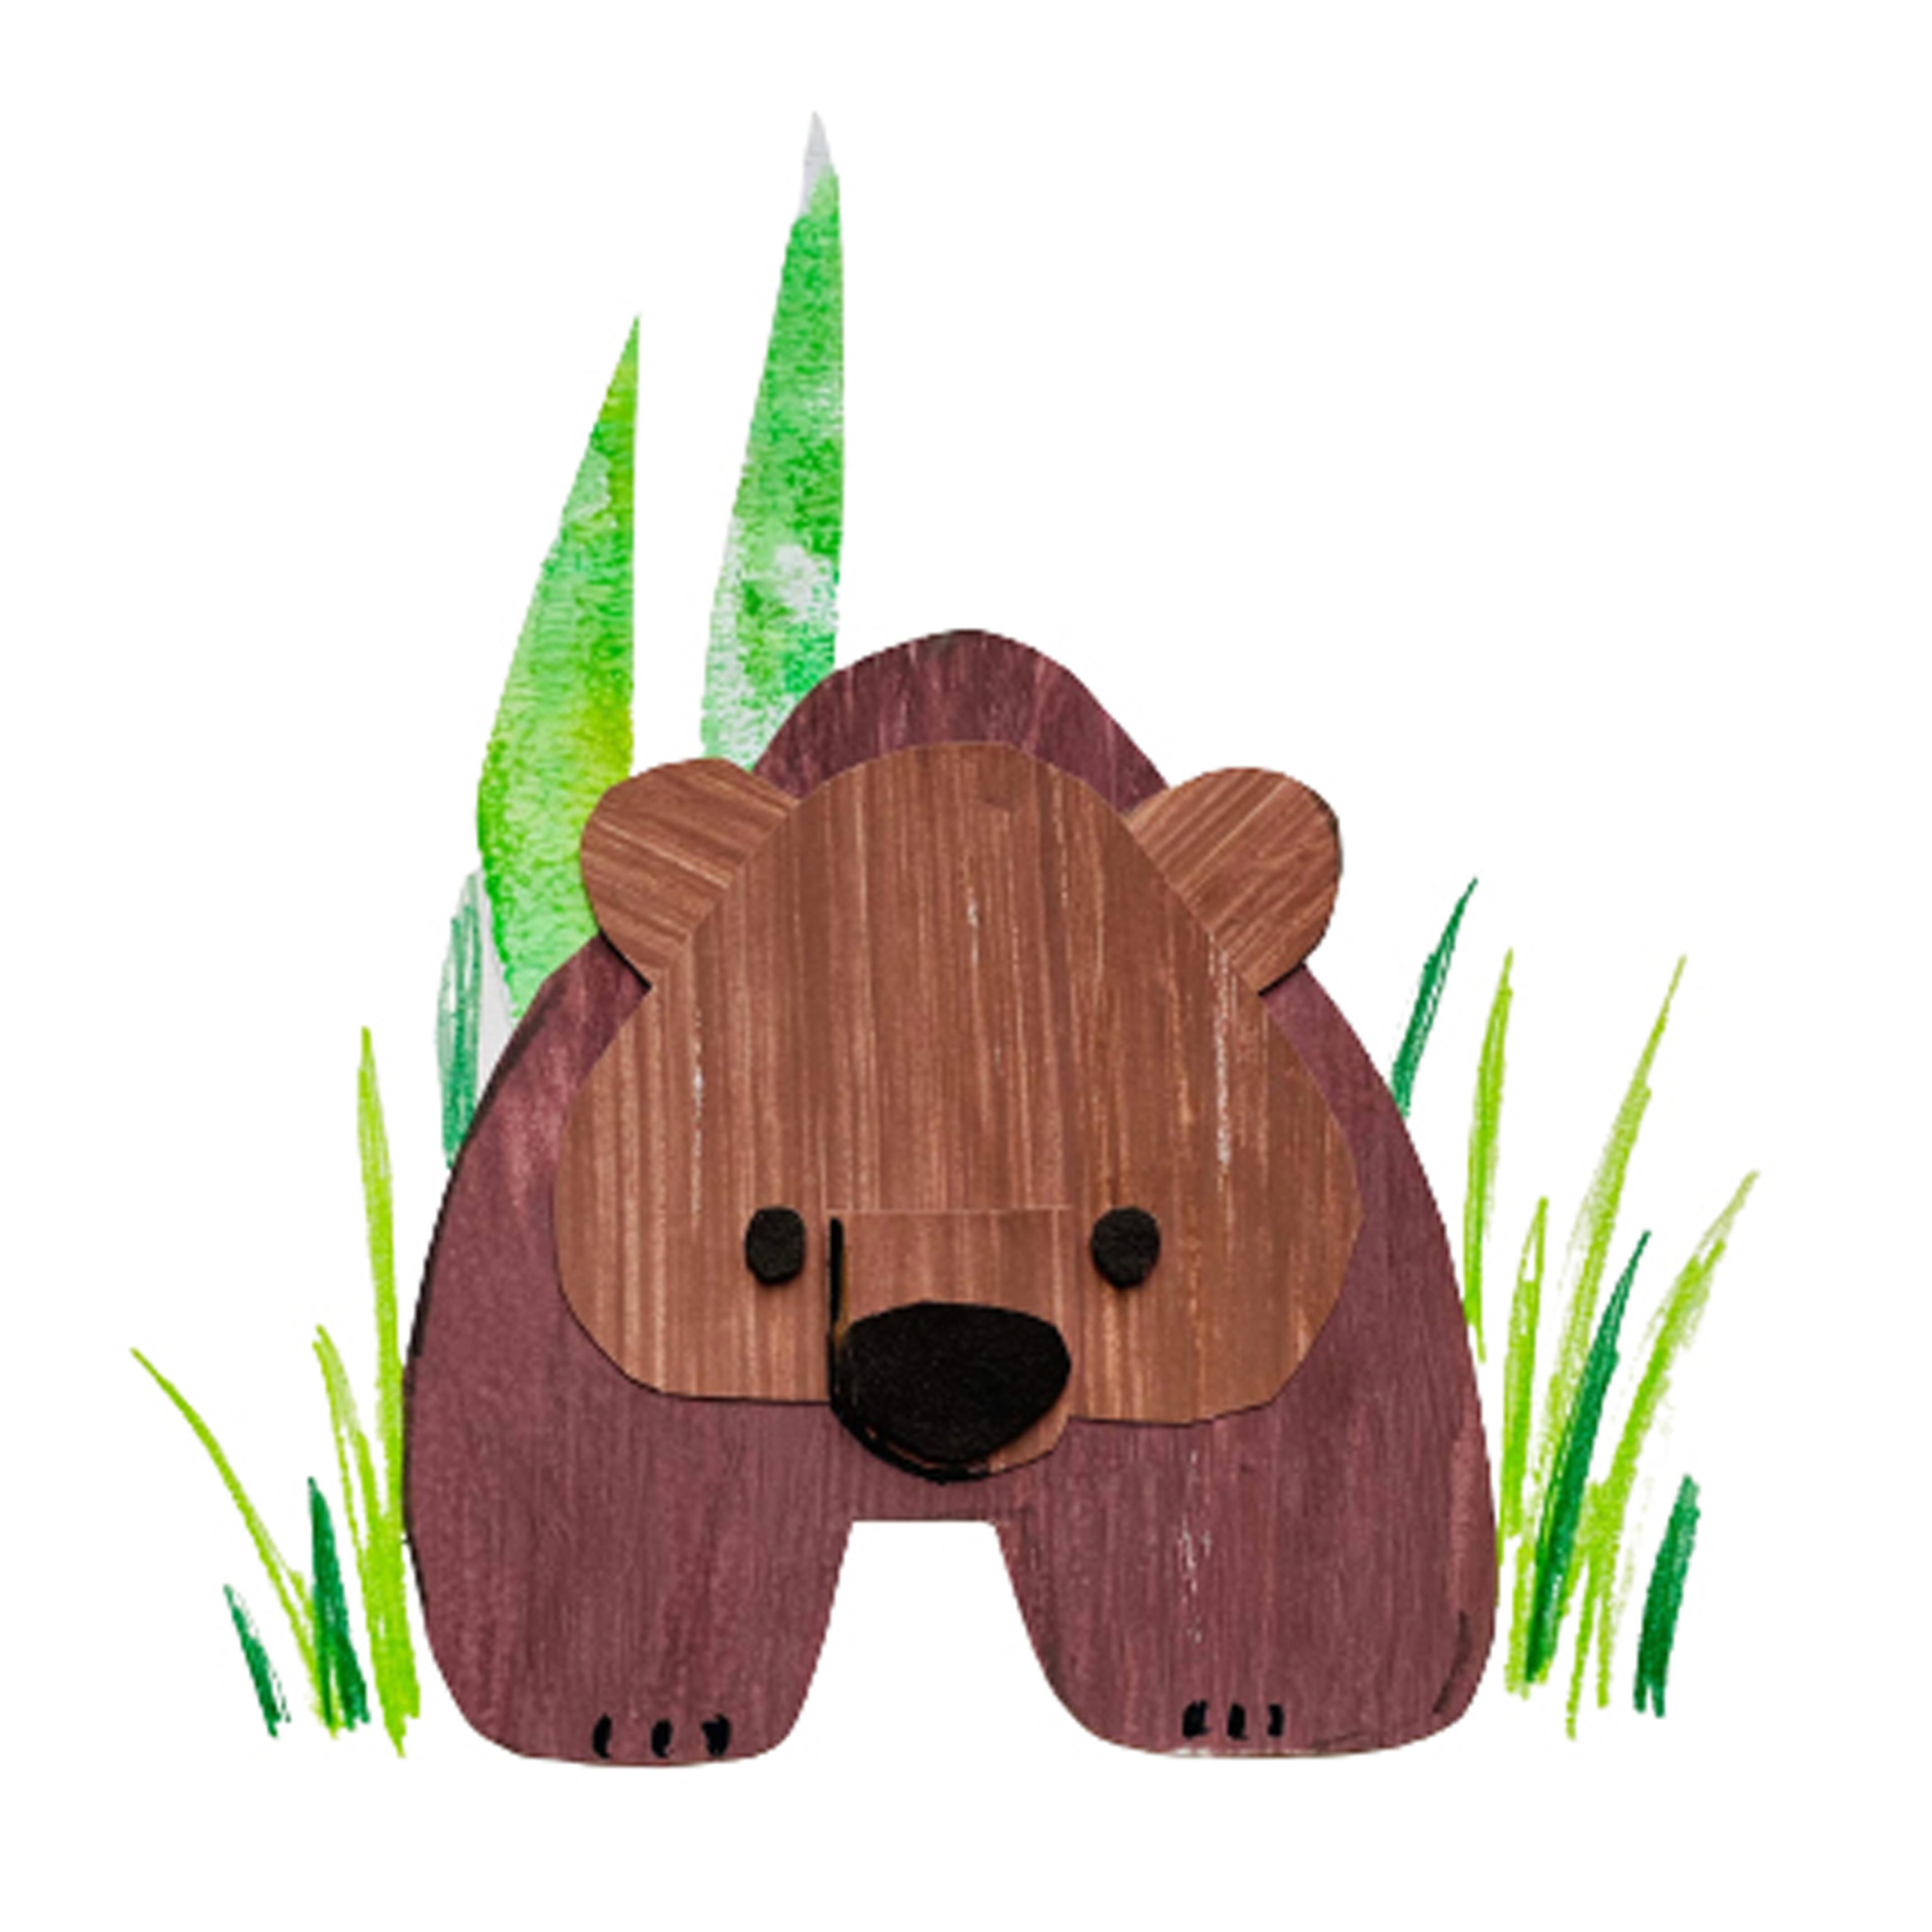 Illustration of brown bear in grass.